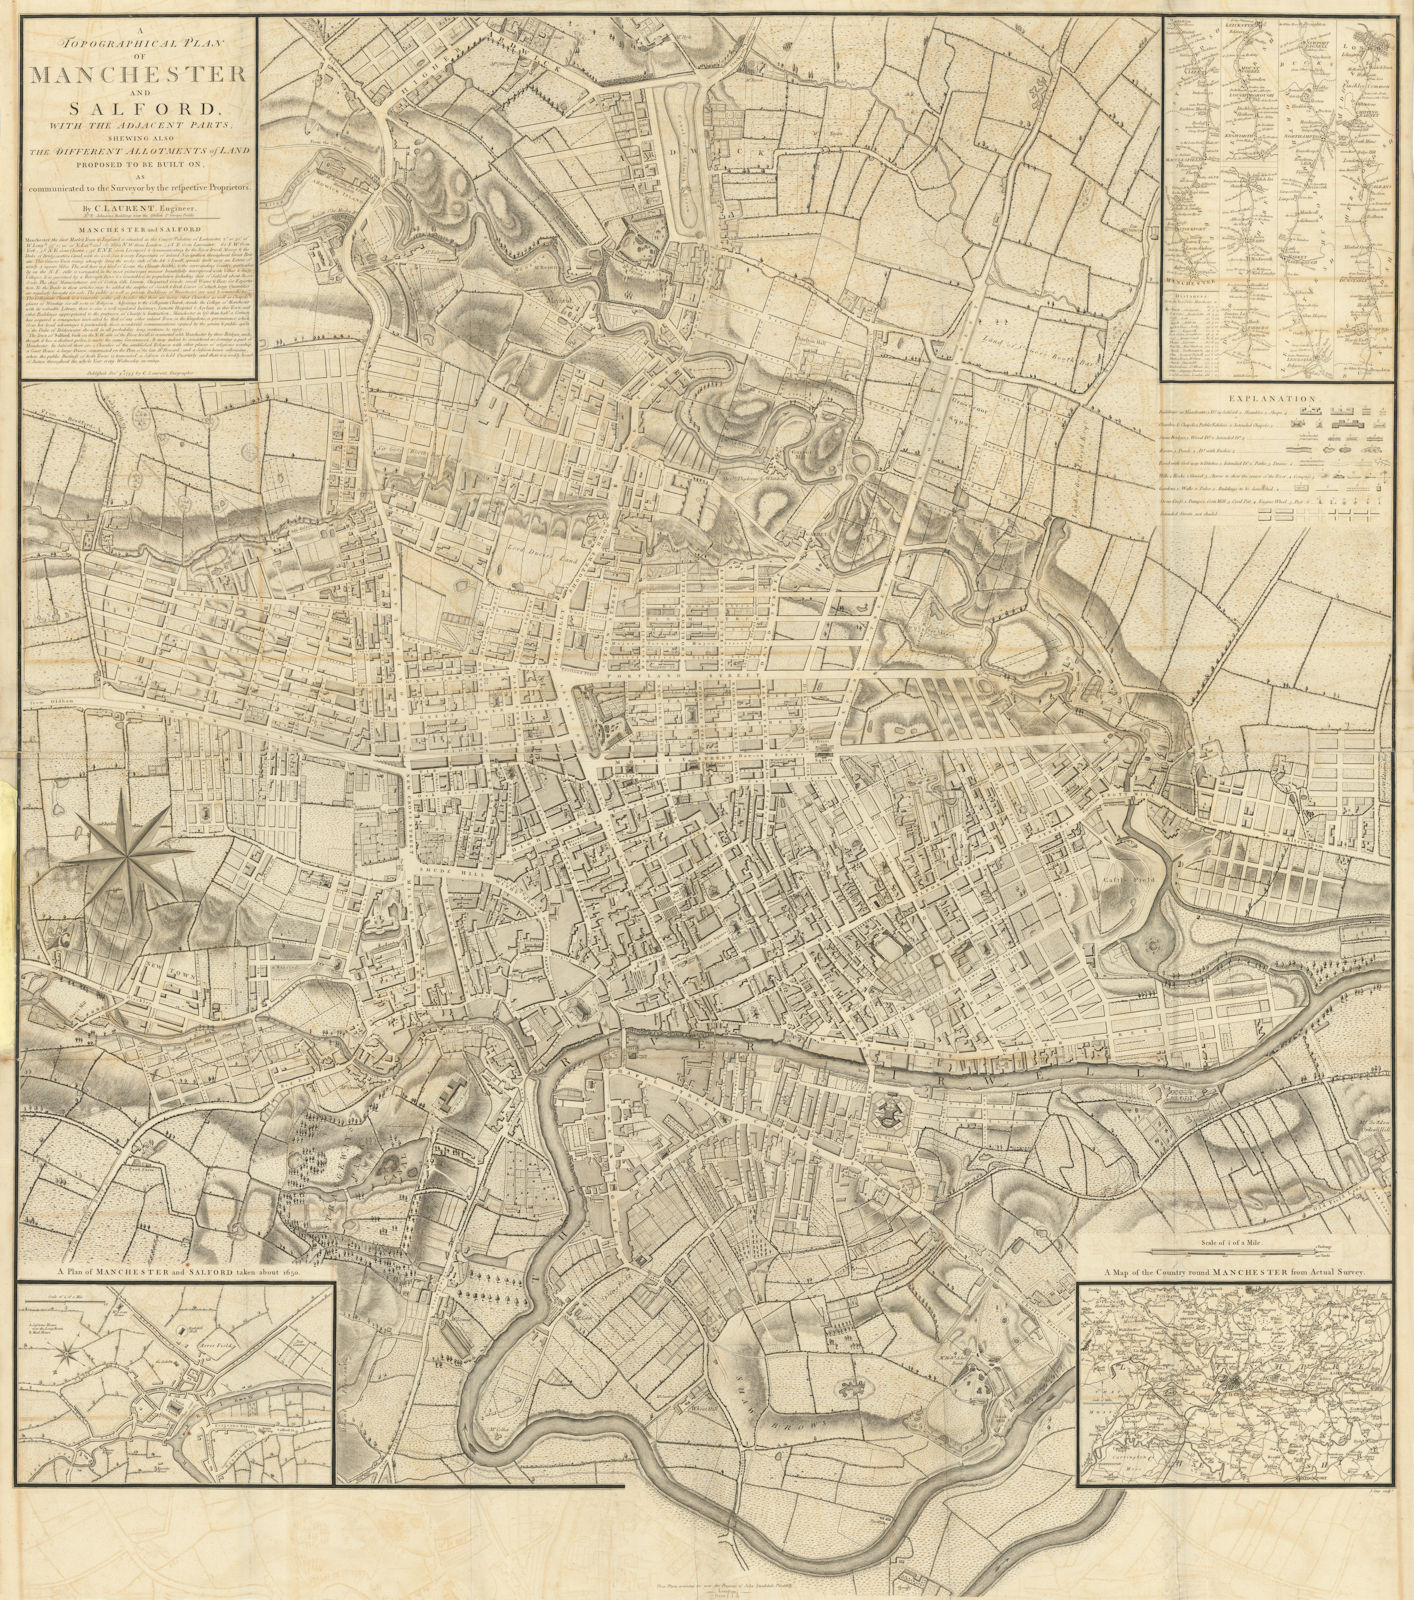 Associate Product MANCHESTER & SALFORD town plan by LAURENT. Large 102x95cm 1793 old antique map